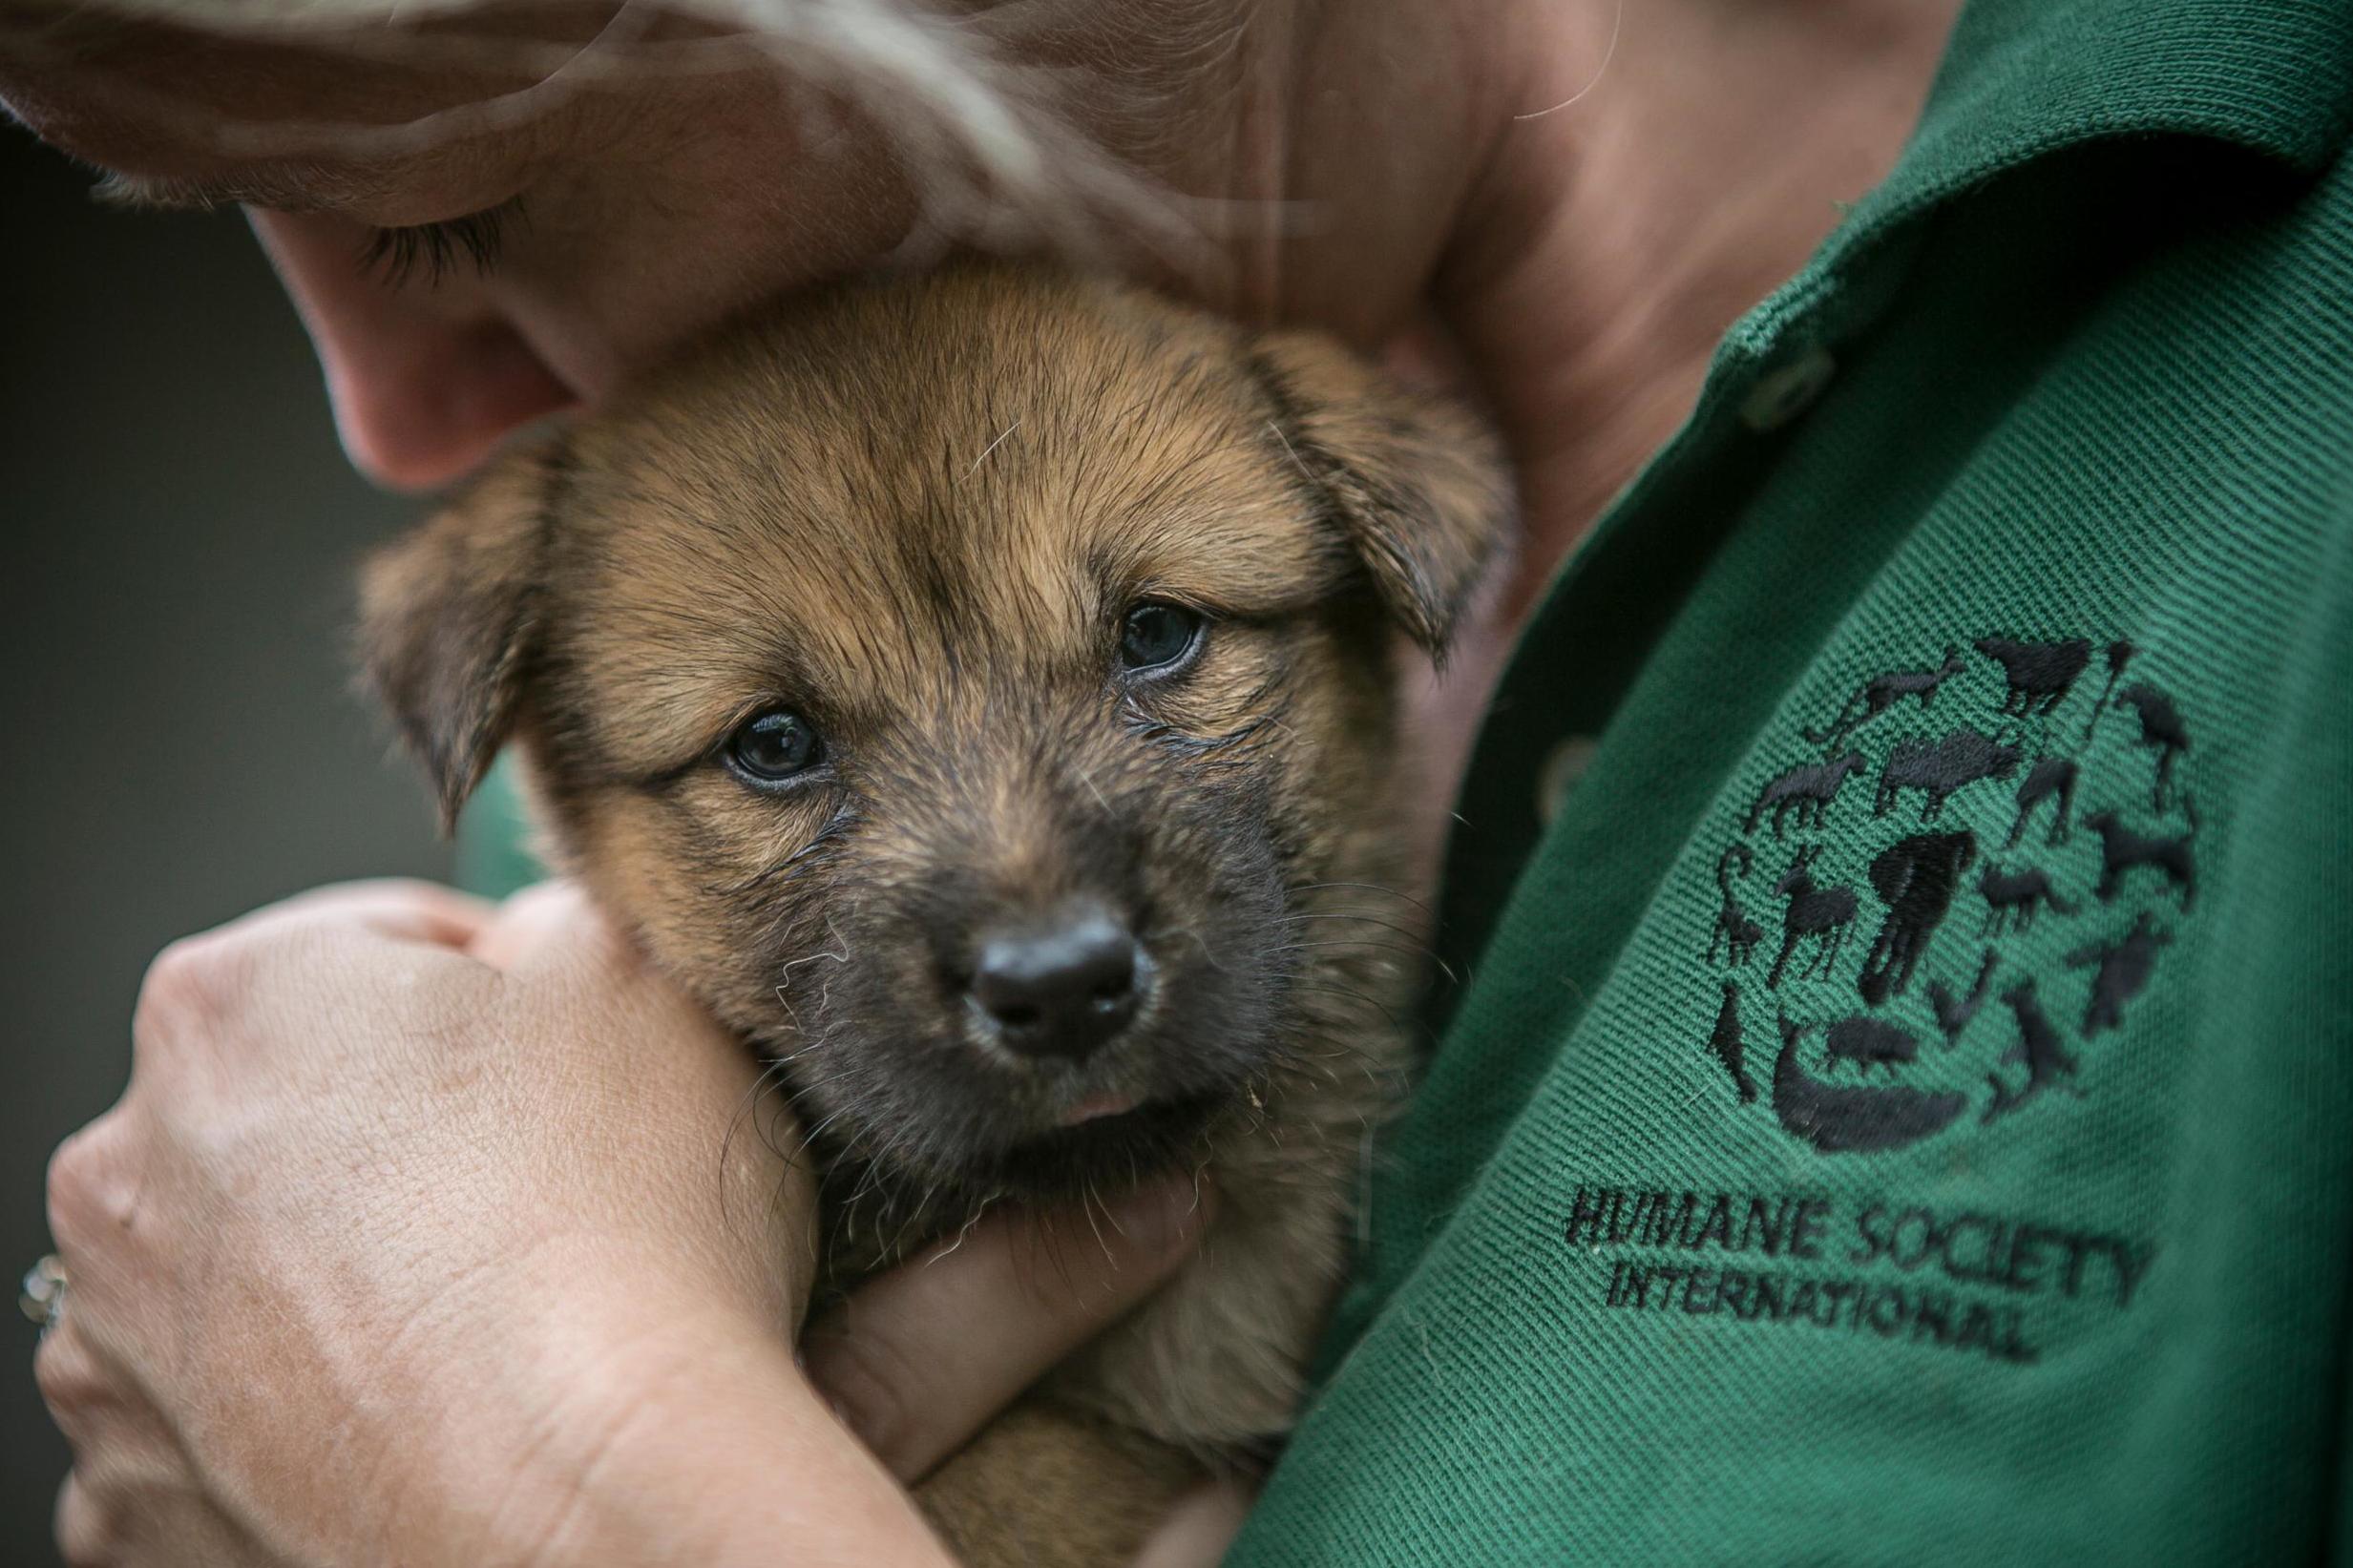 The rescued dogs will be found new homes in the US (Jean Chung for Humane Society International)